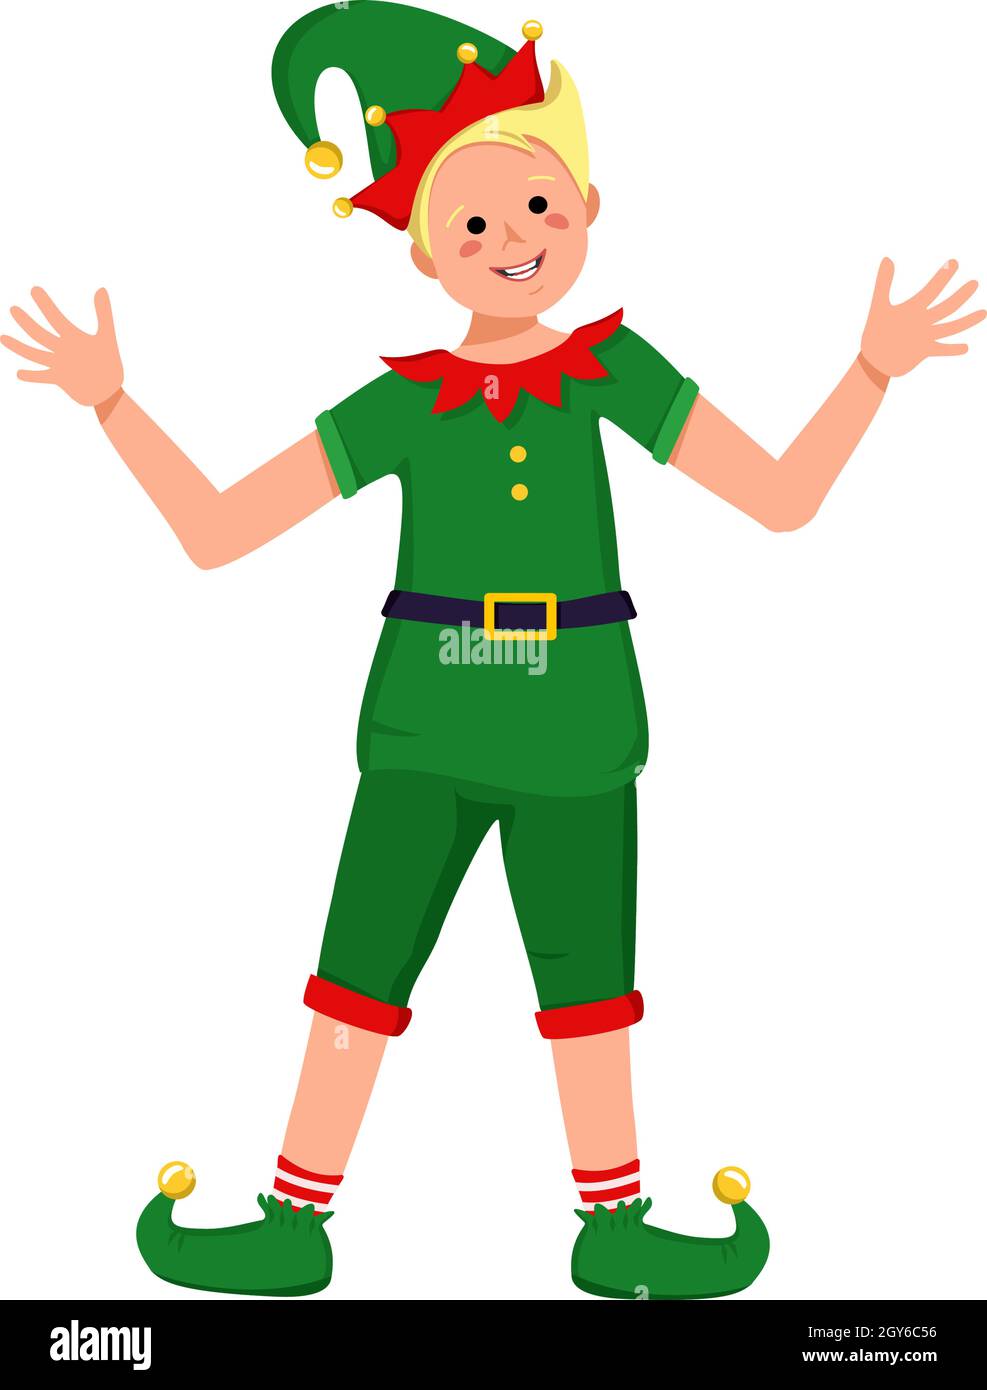 Cute boy with happy face and eyes in festive elf costume for Christmas, New Year or holiday Stock Vector